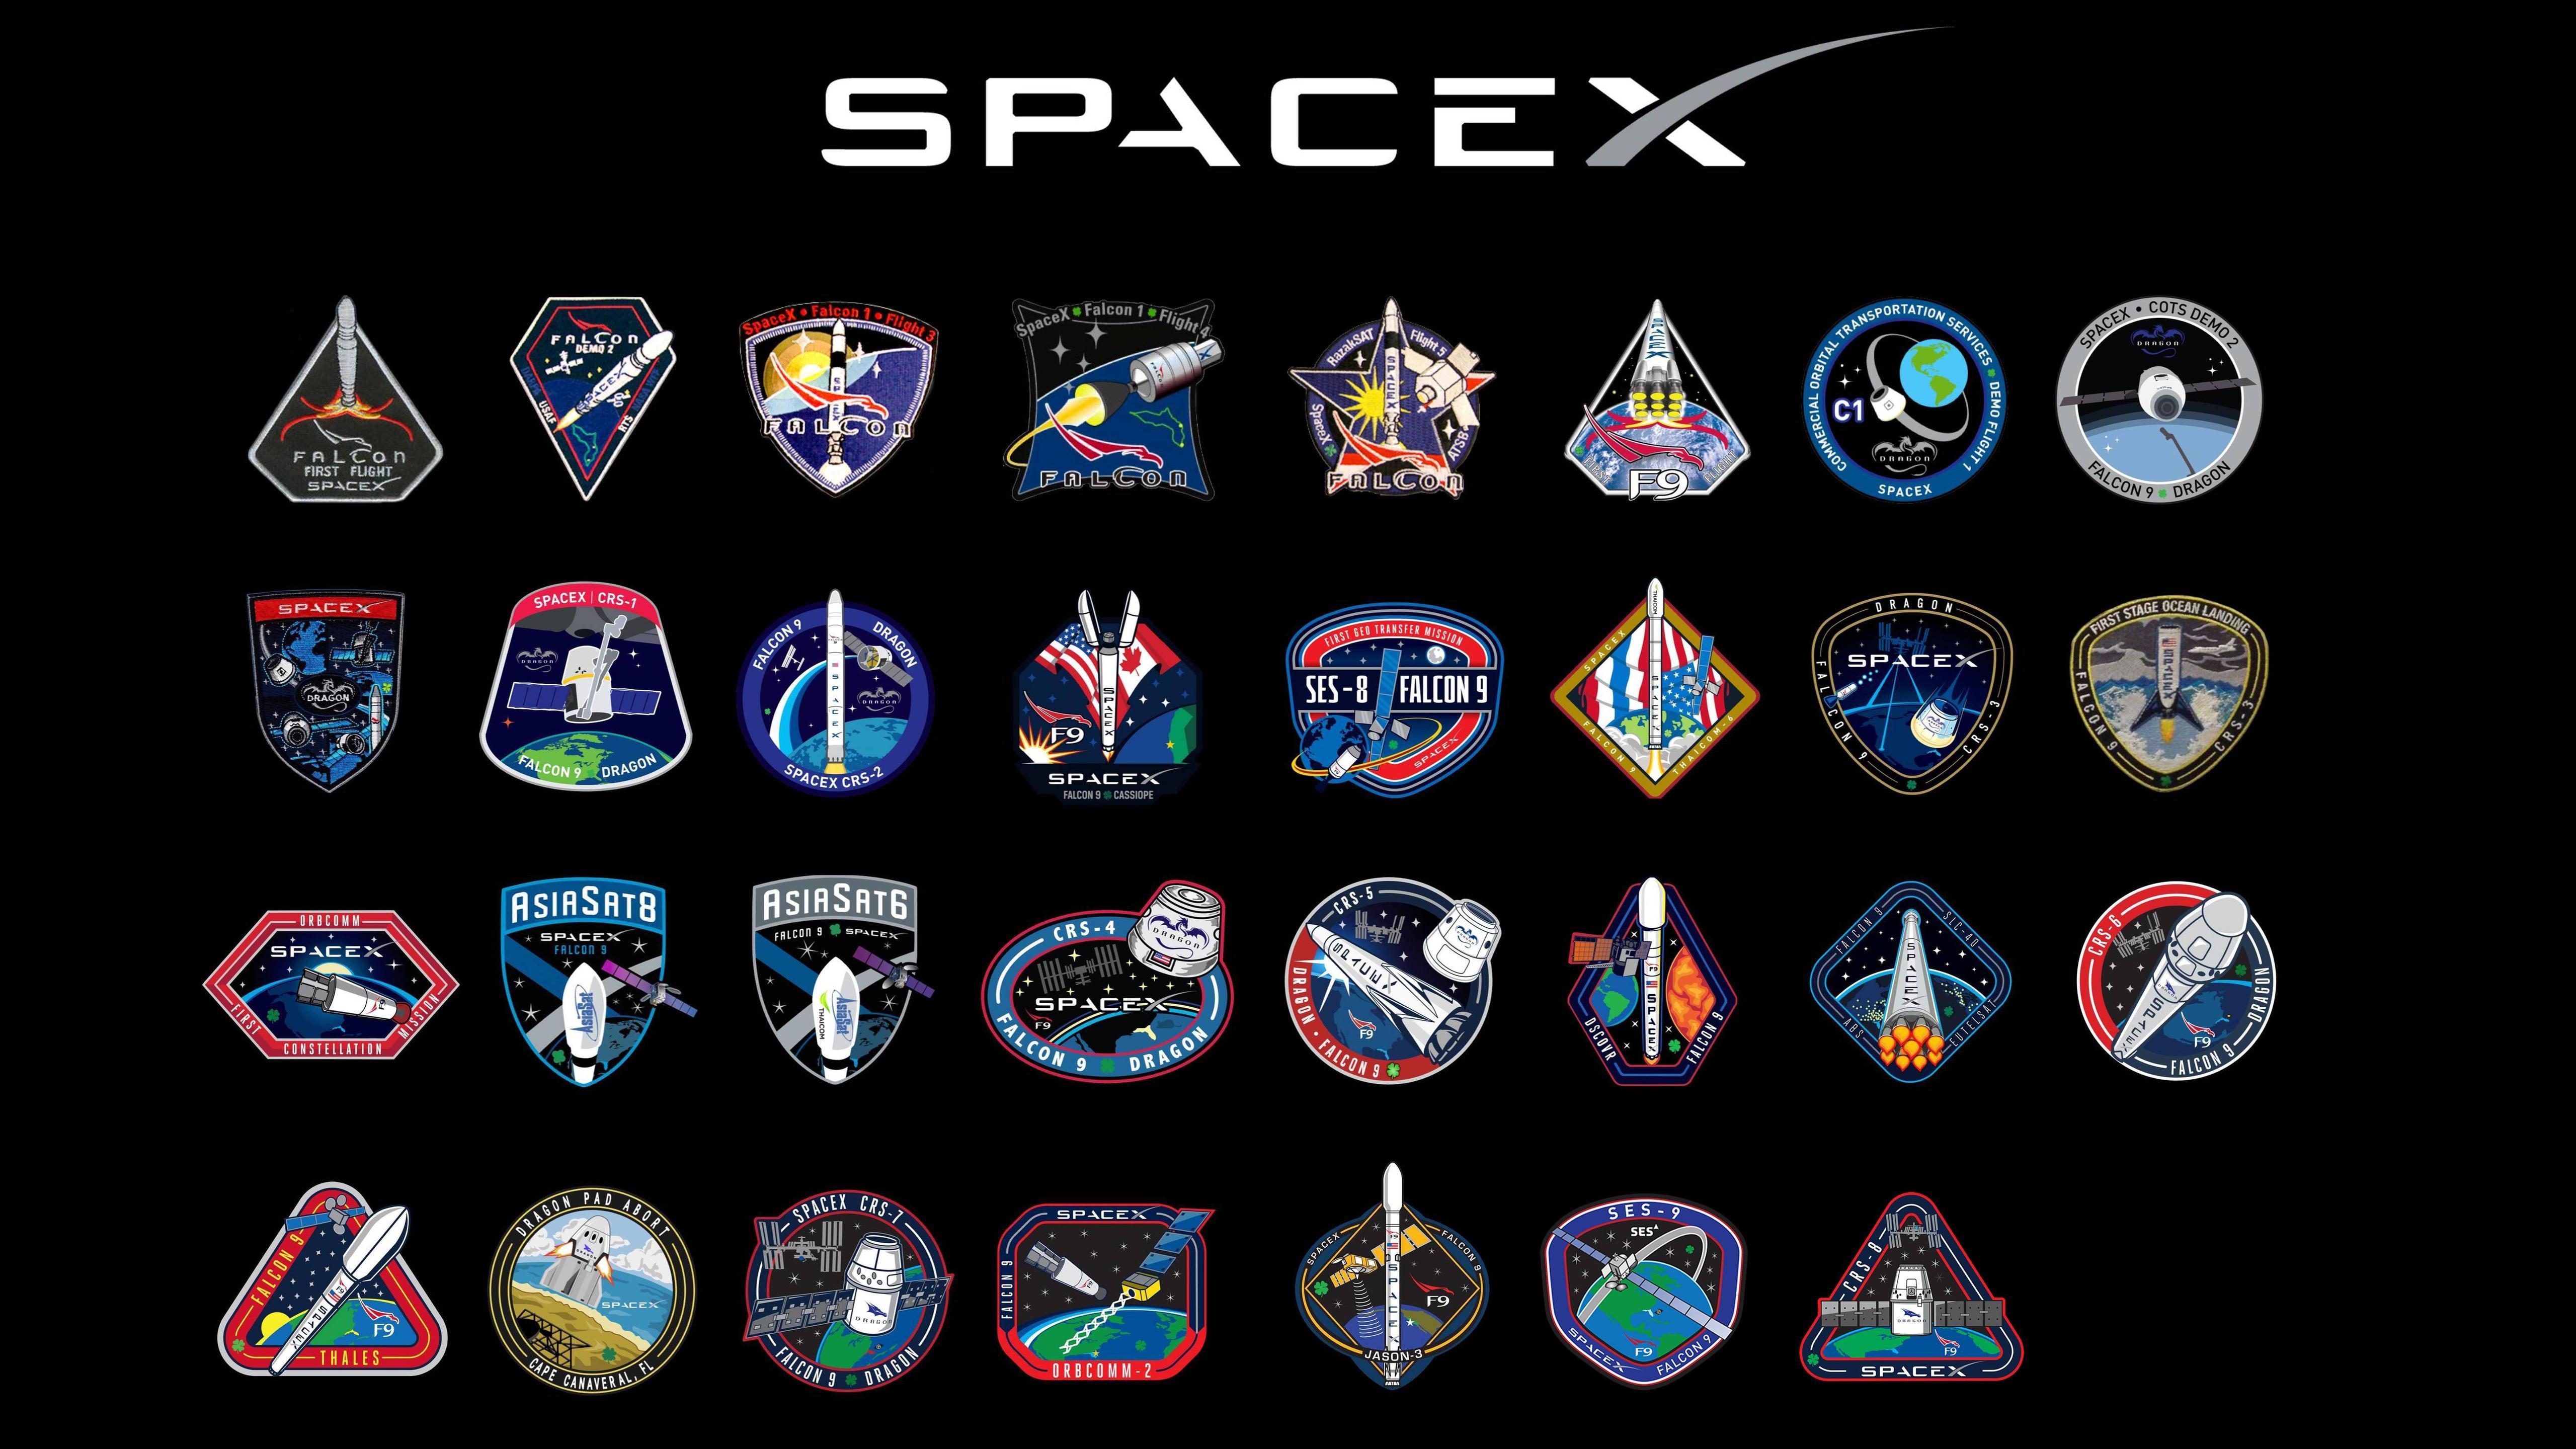 SpaceX Letters Logo - SpaceX Mission Patch Wallpaper (16:9) : spacex